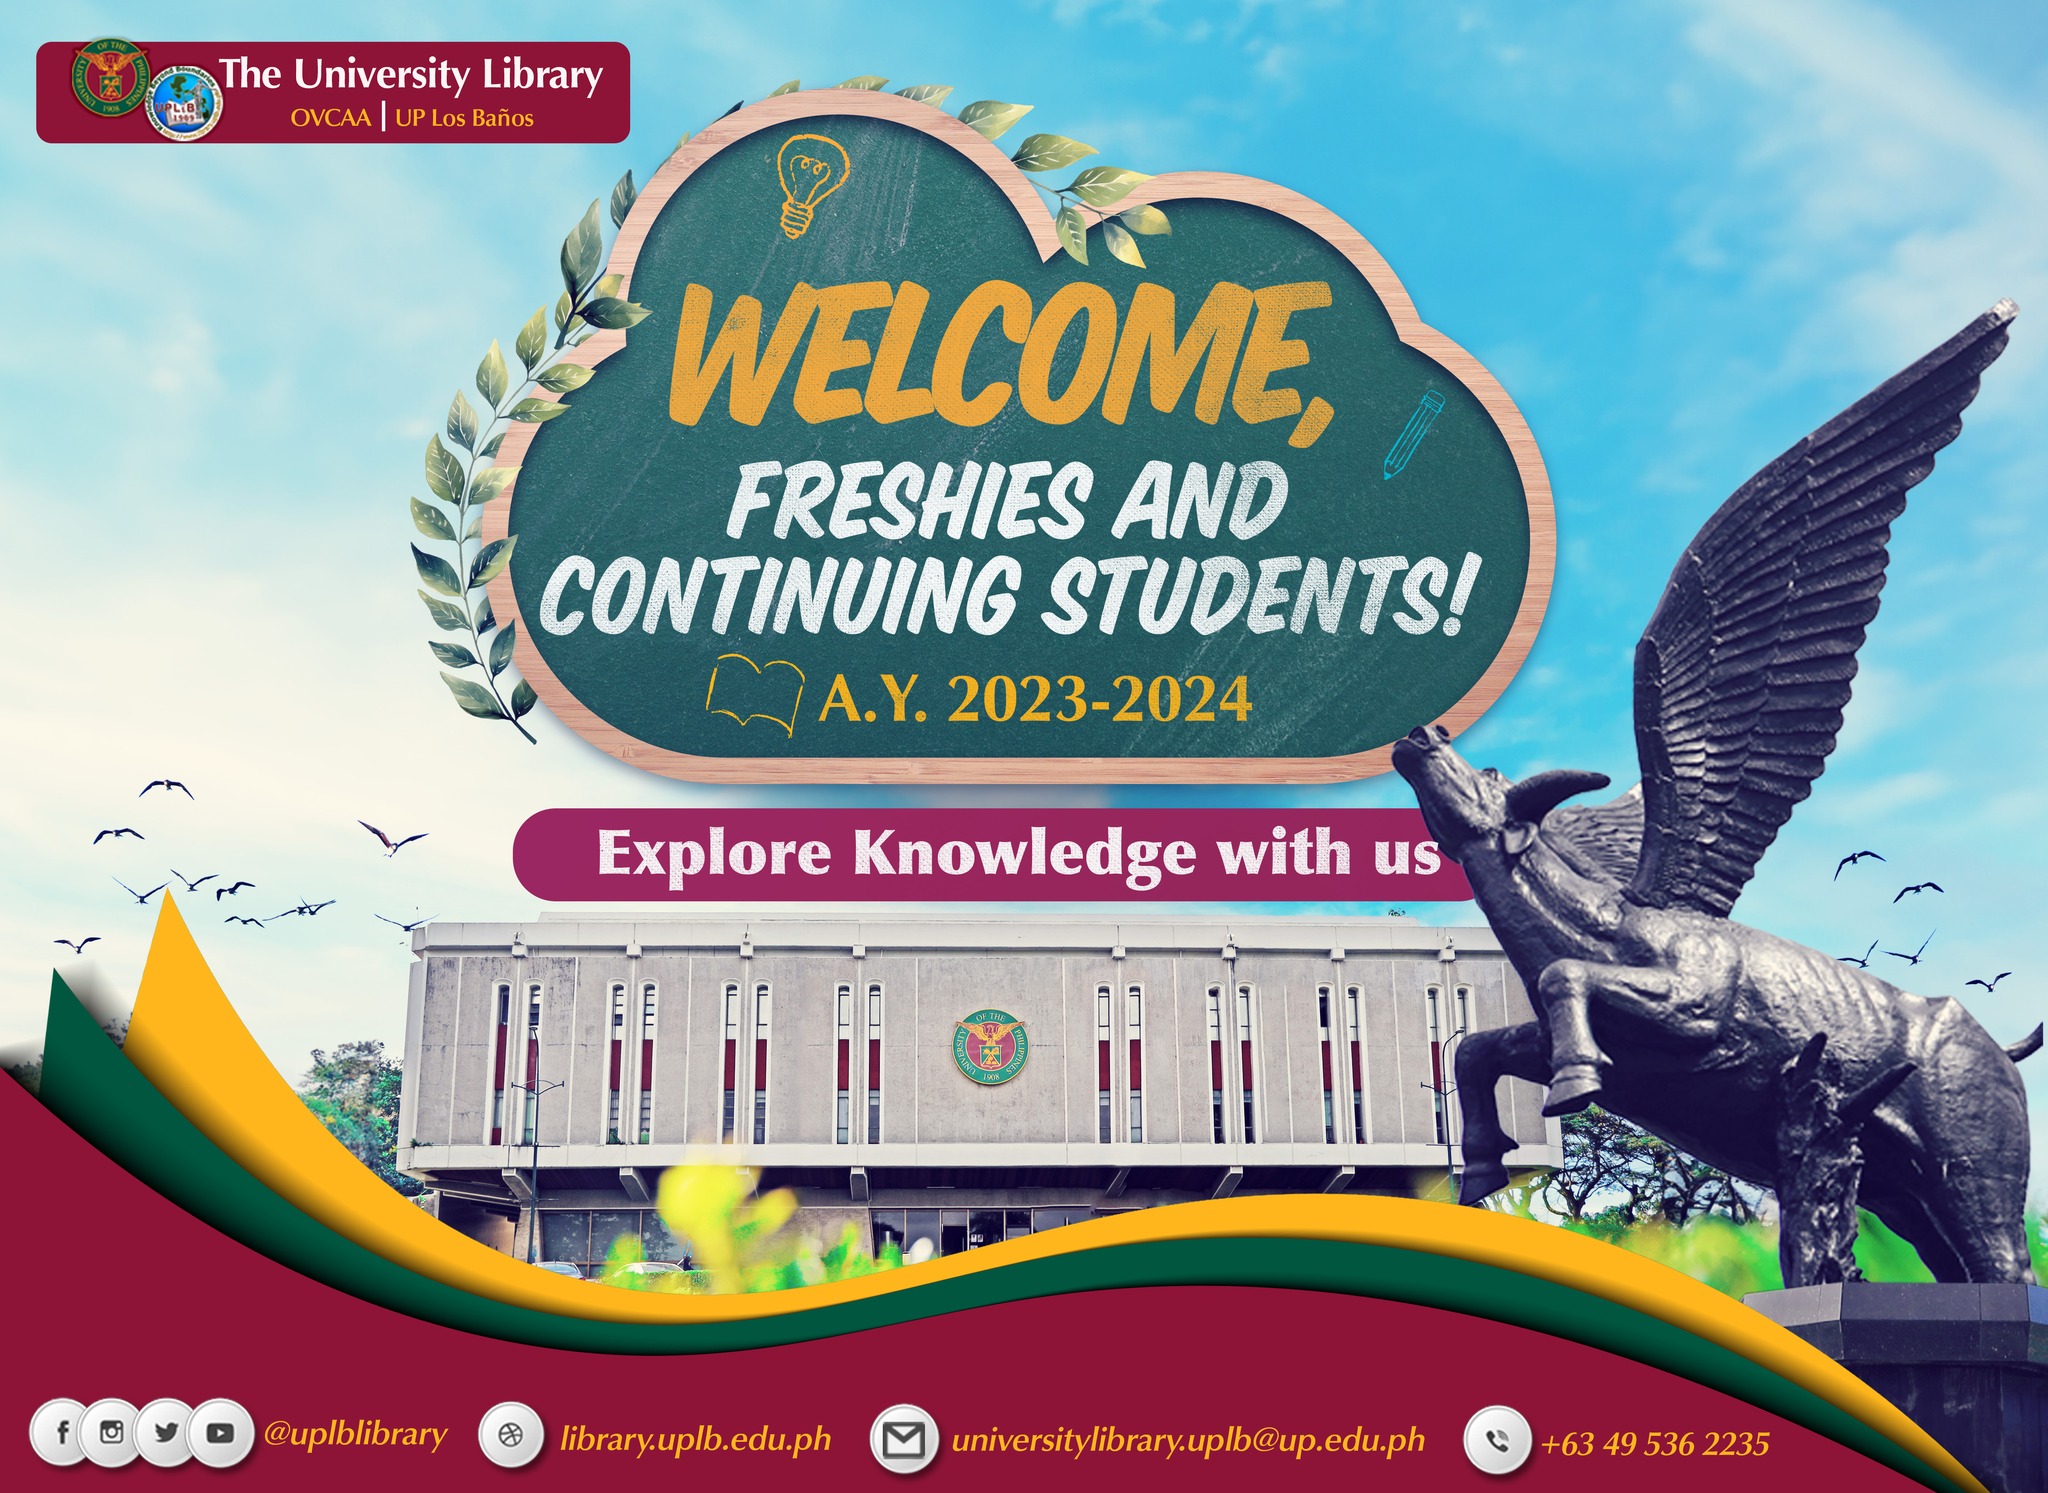 The University Library extends a warm welcome to both our new Freshies and our dedicated Continuing Students.